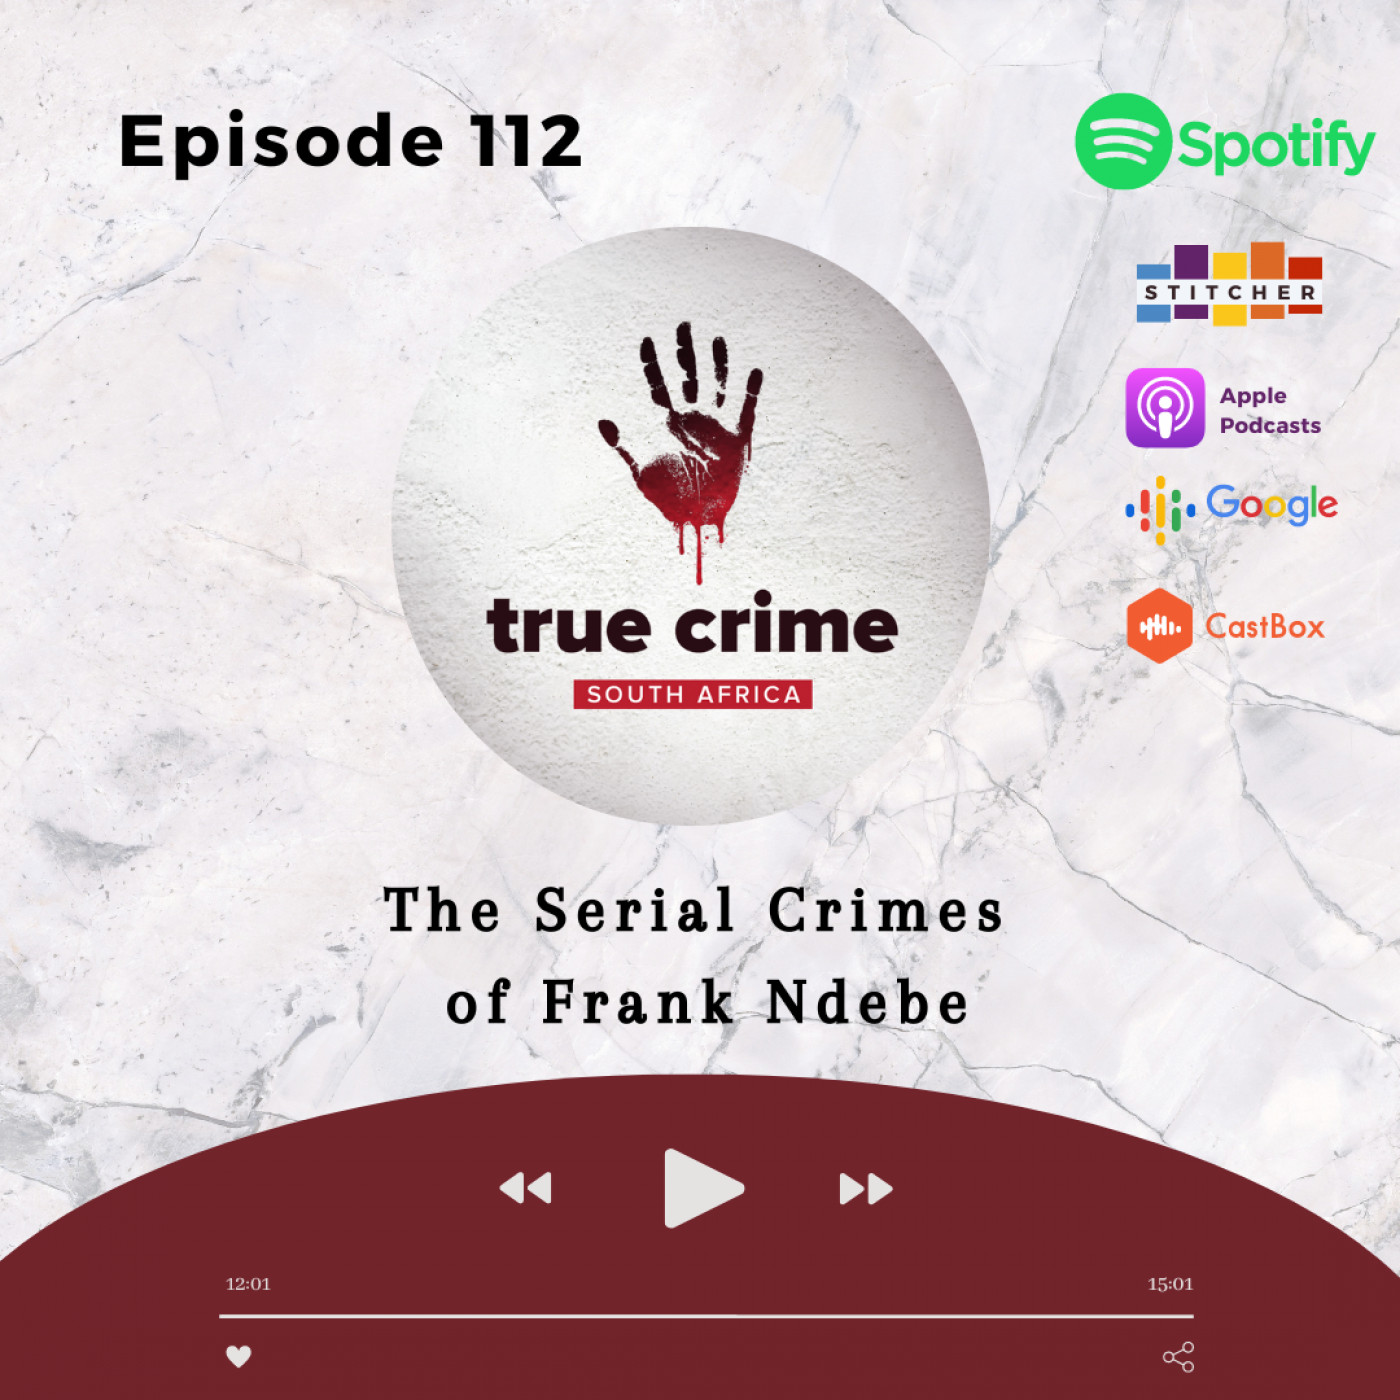 Episode 112 The Serial Crimes of Frank Ndebe